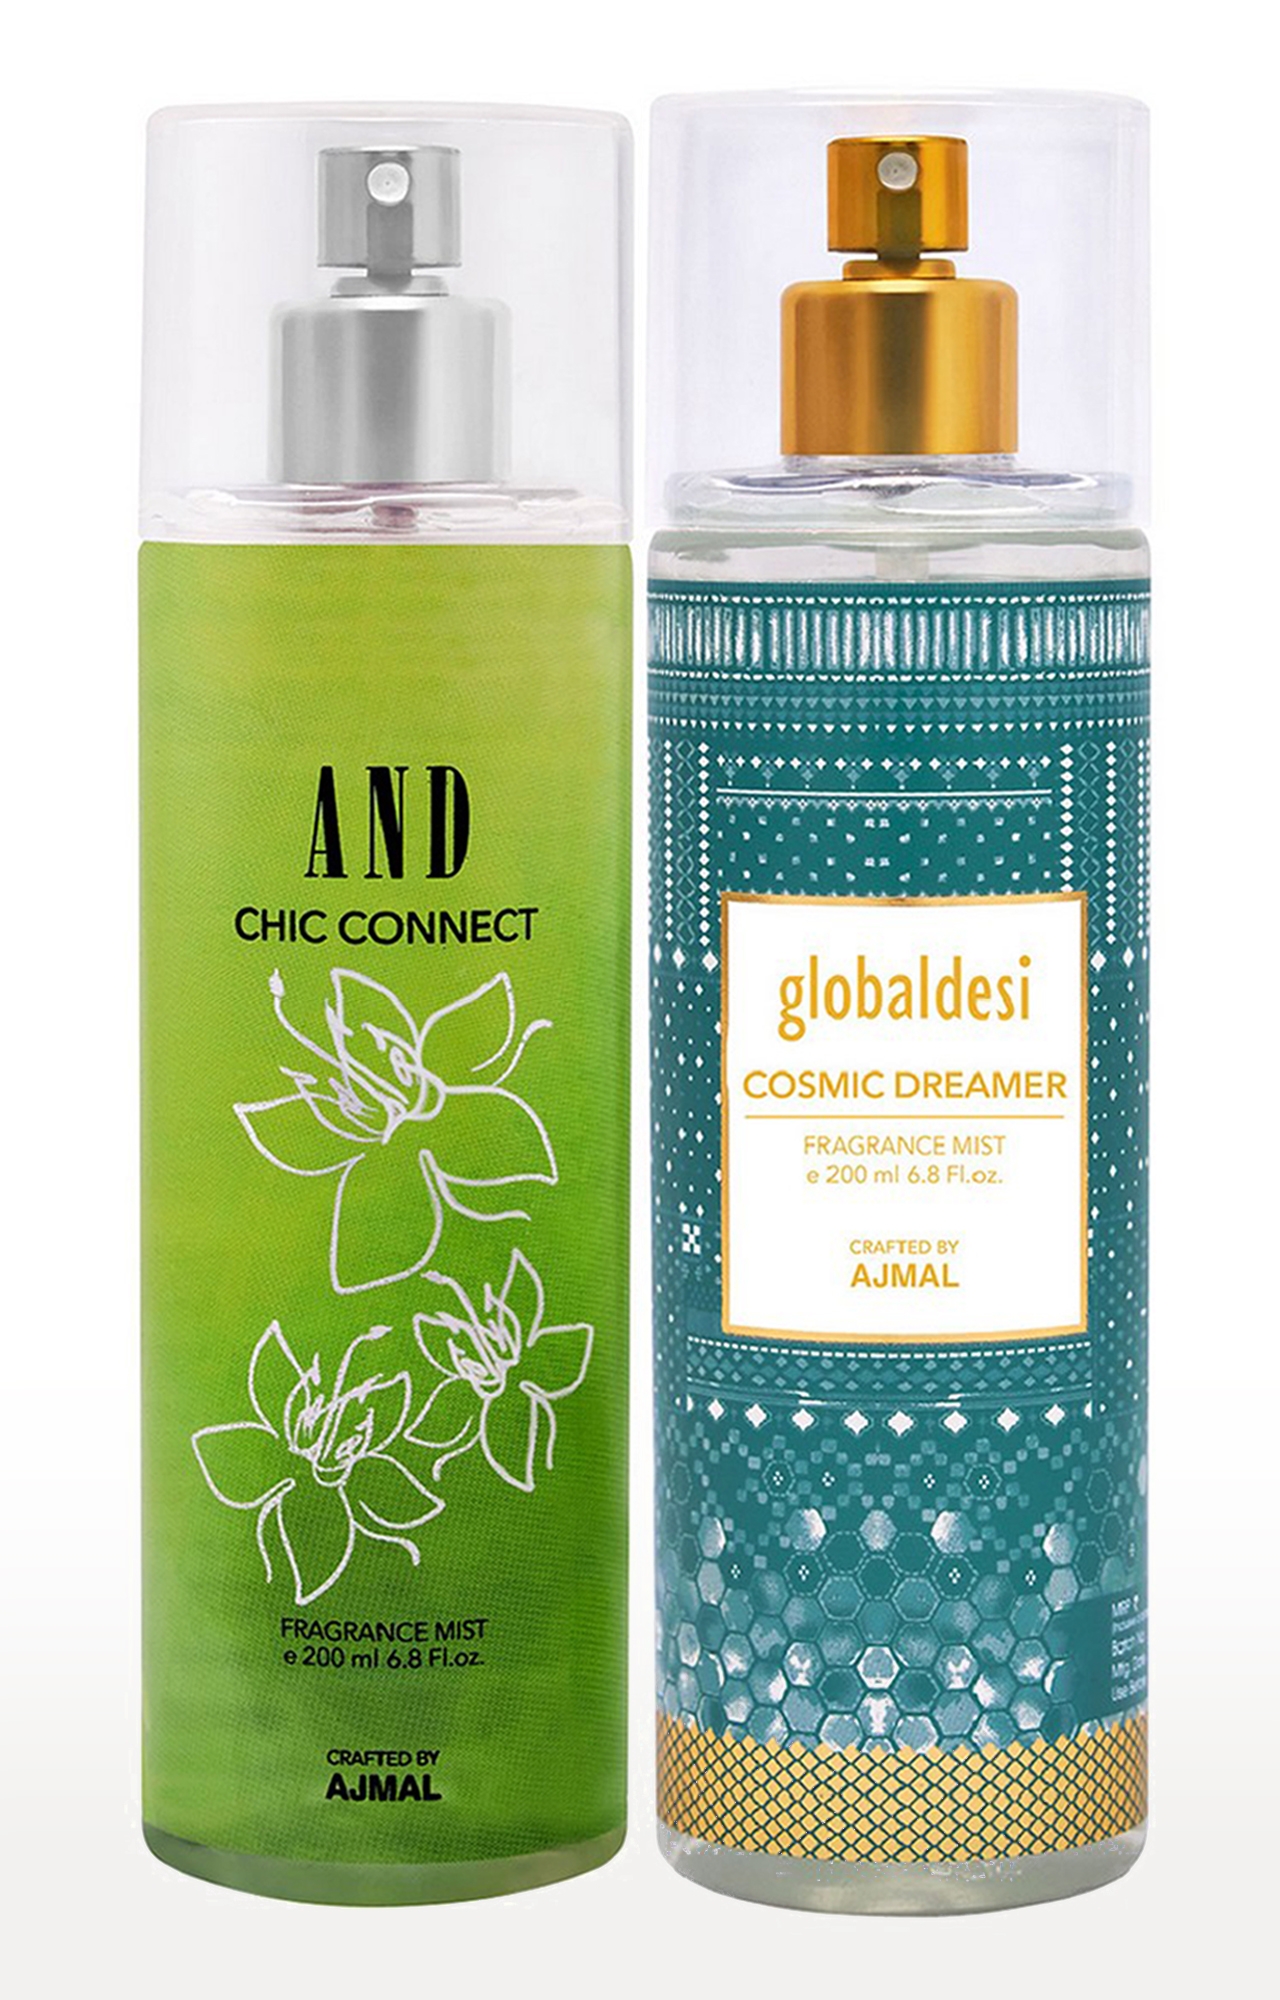 AND Crafted By Ajmal | AND Chic Connect Body Mist 200ML & Global Desi Cosmic Dreamer Body Mist 200ML 